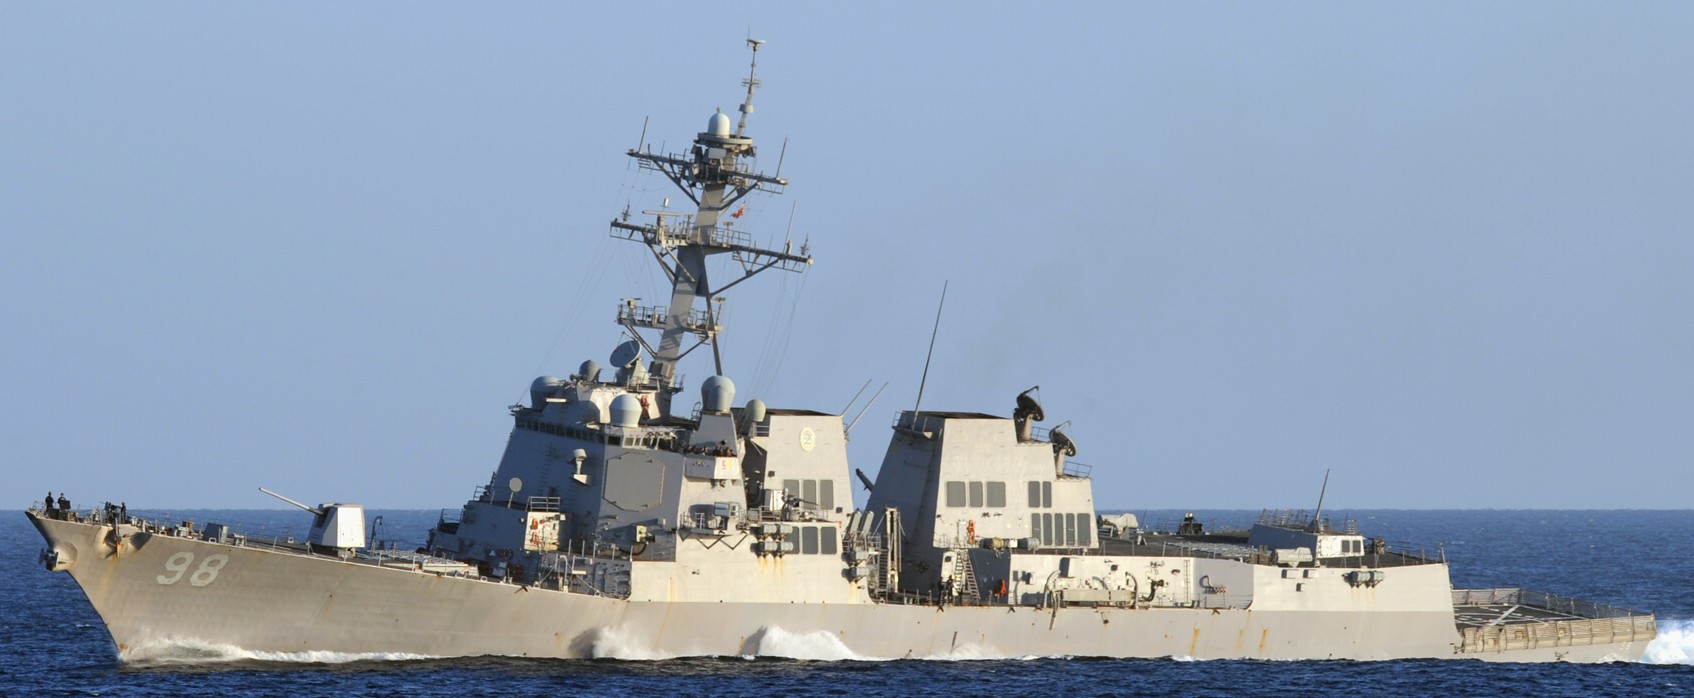 ddg-98 uss forrest sherman arleigh burke class guided missile destroyer aegis us navy gulf of aden 16